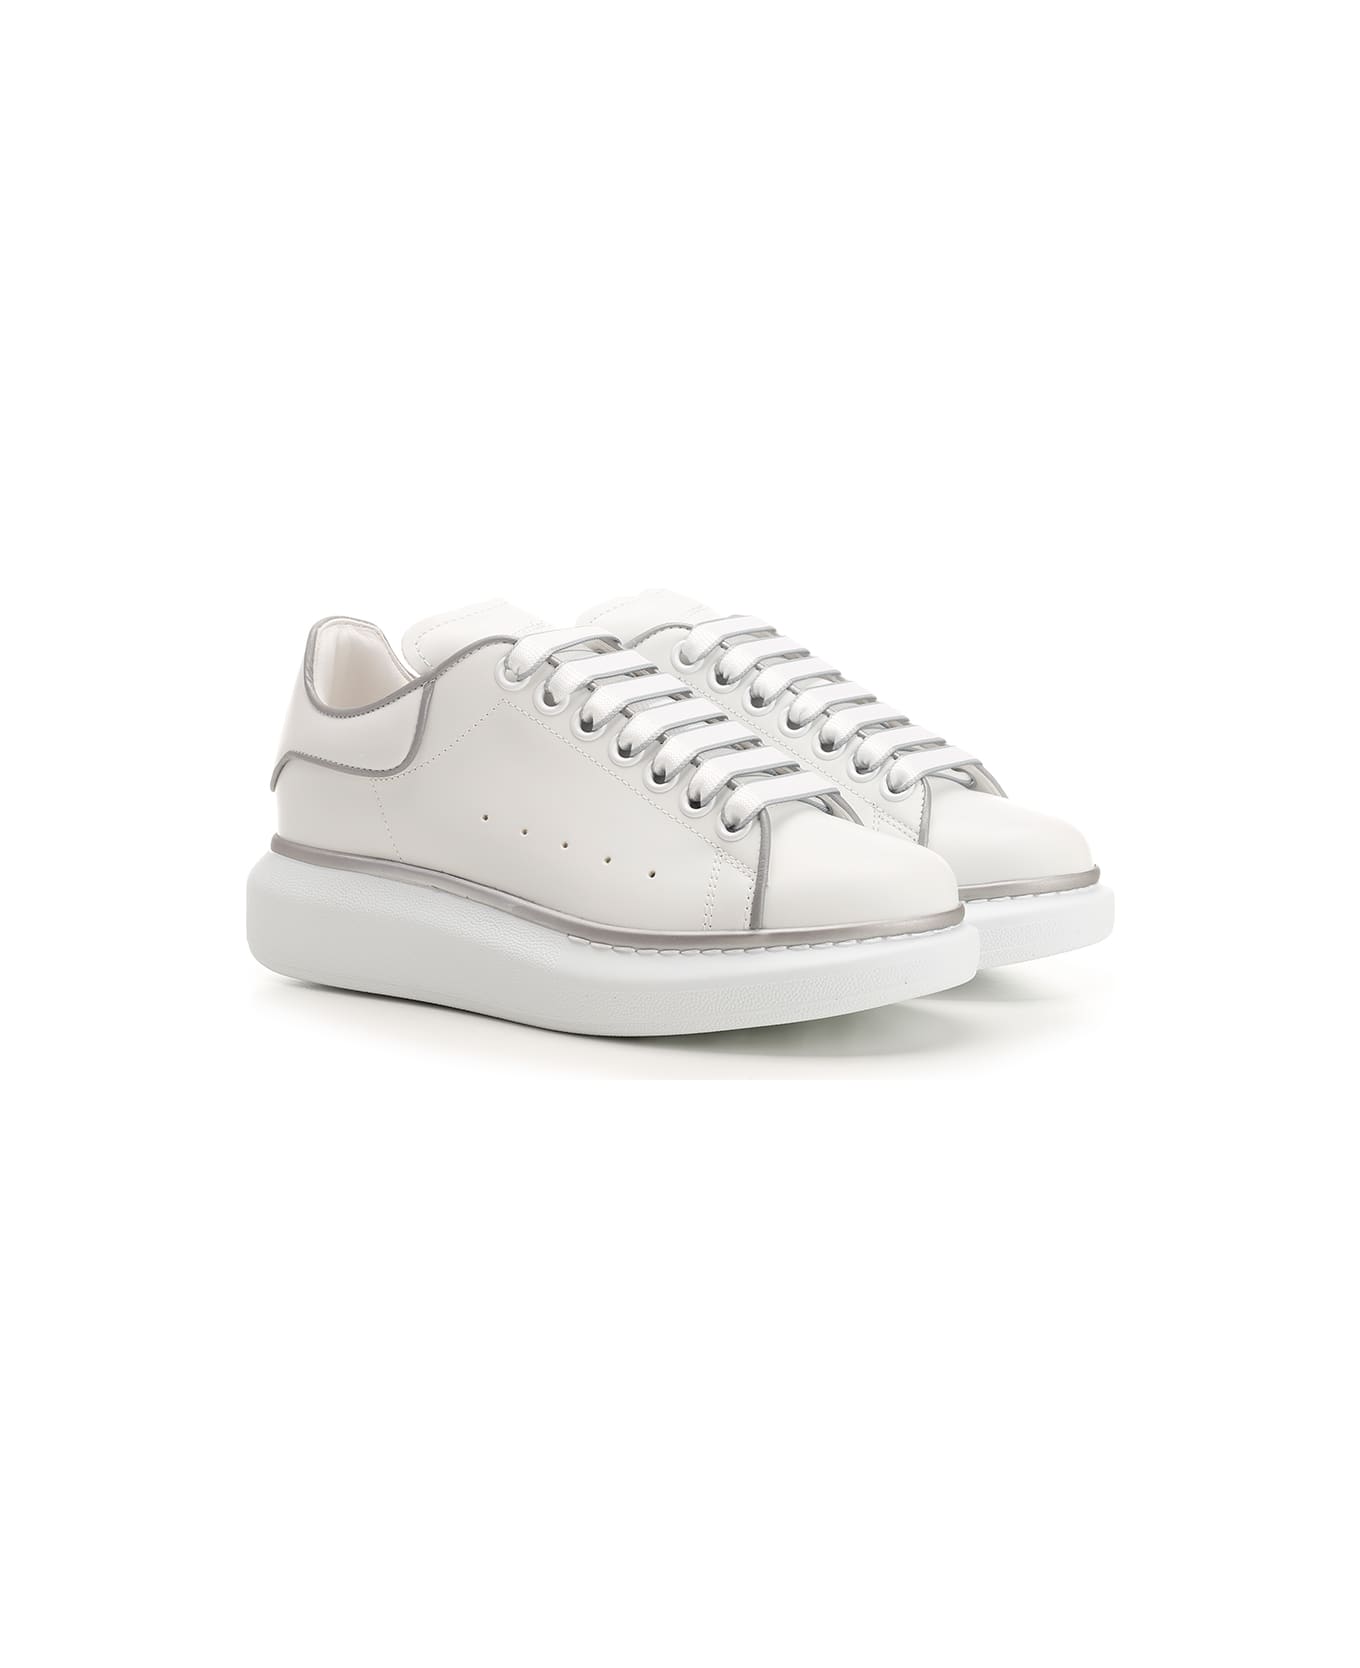 Alexander McQueen White Oversized Sneakers With Silver Piping - White スニーカー